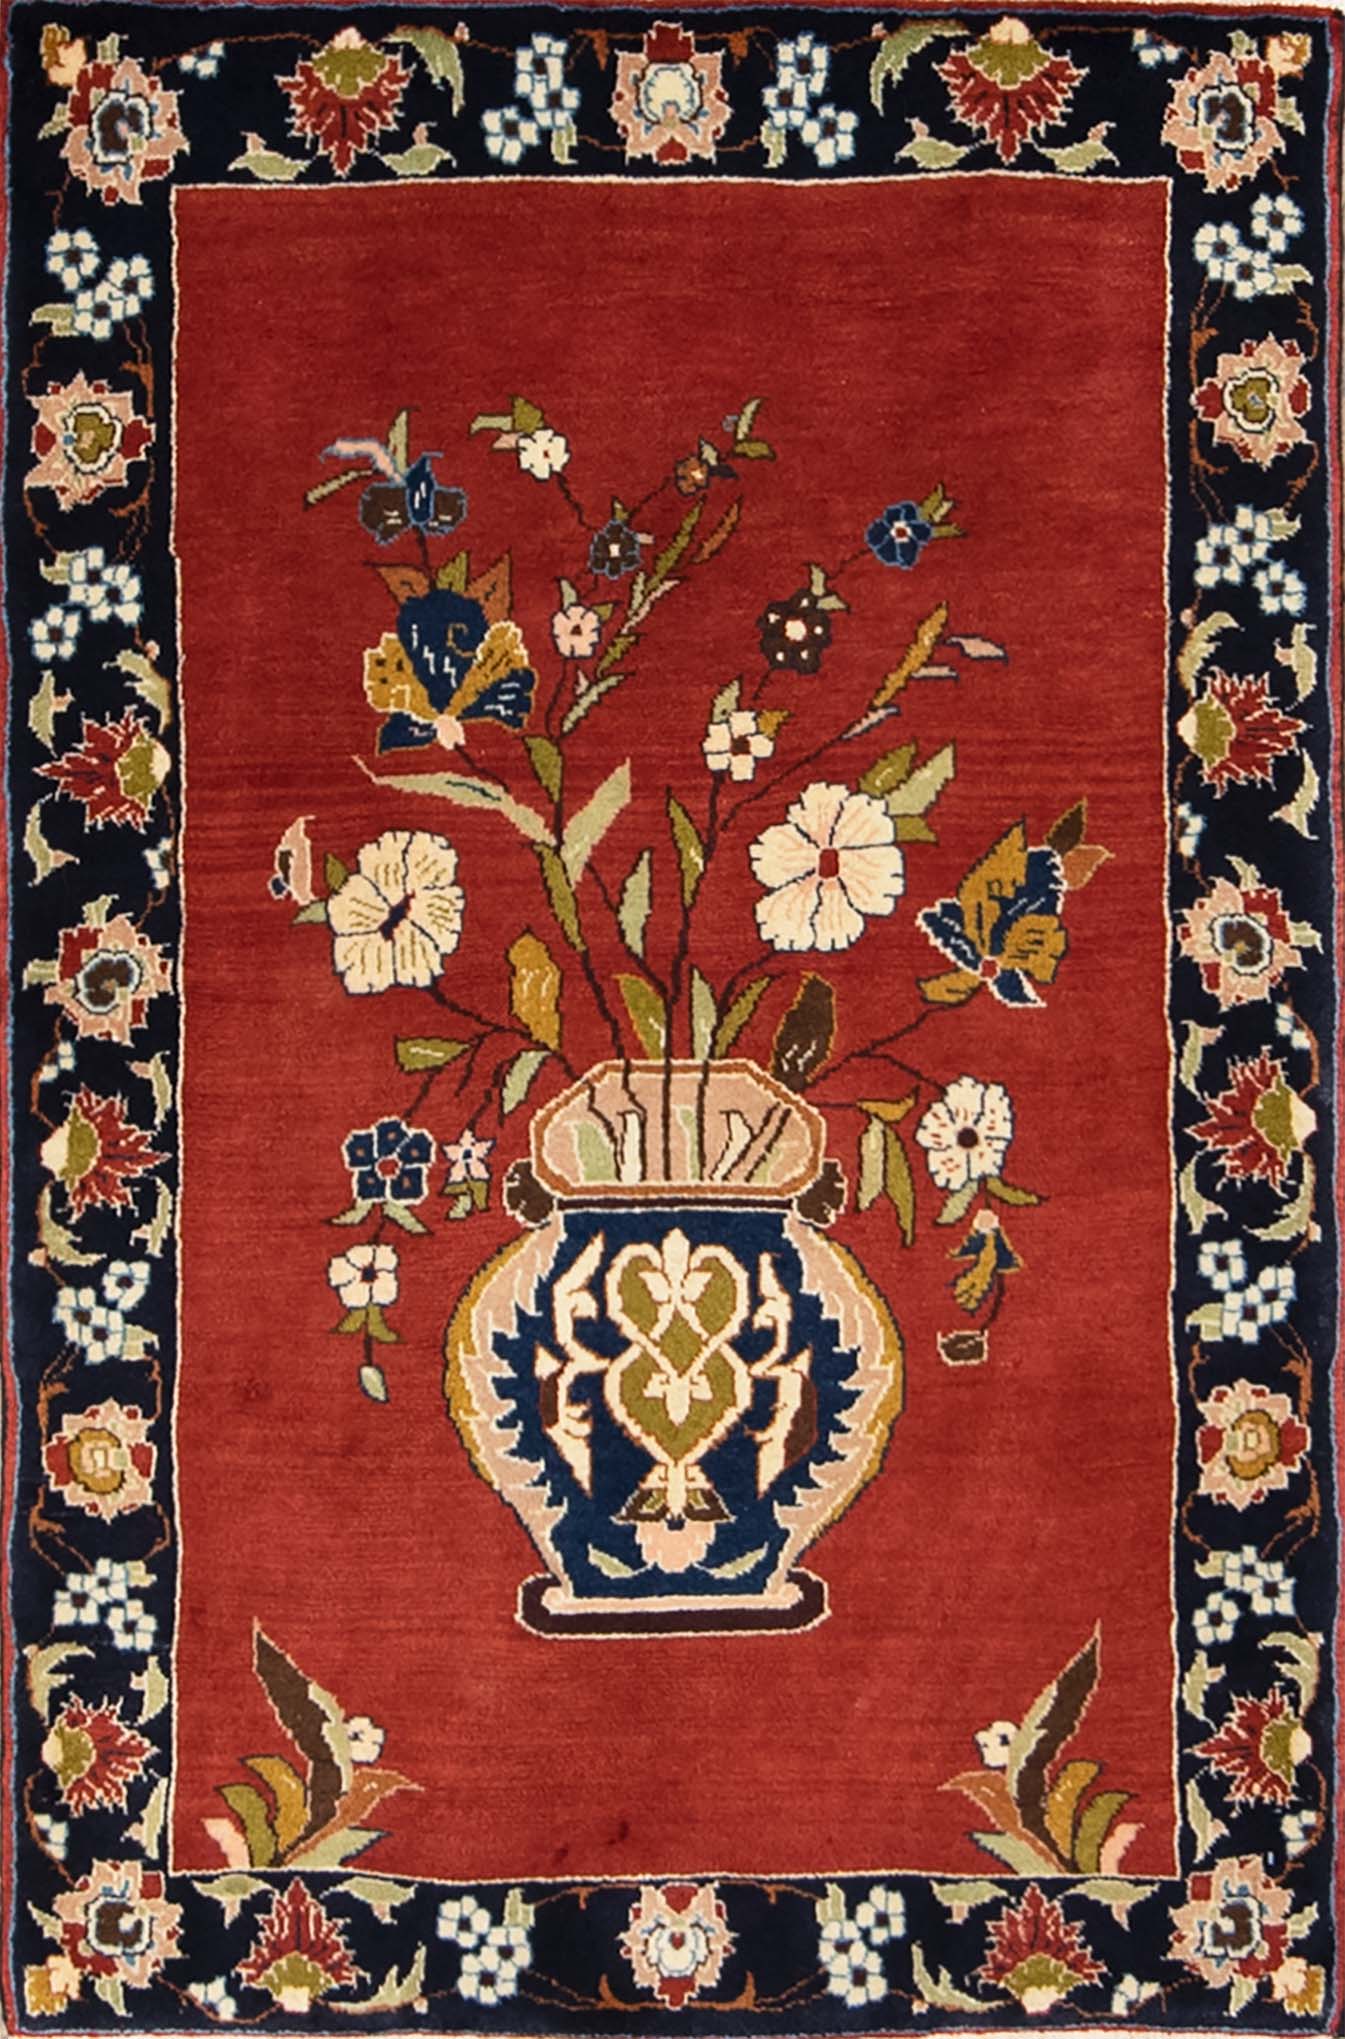 Wool rug. Hand woven Persian Shiraz rug with a vase and flowers with terracotta color. Size 3.4x5.